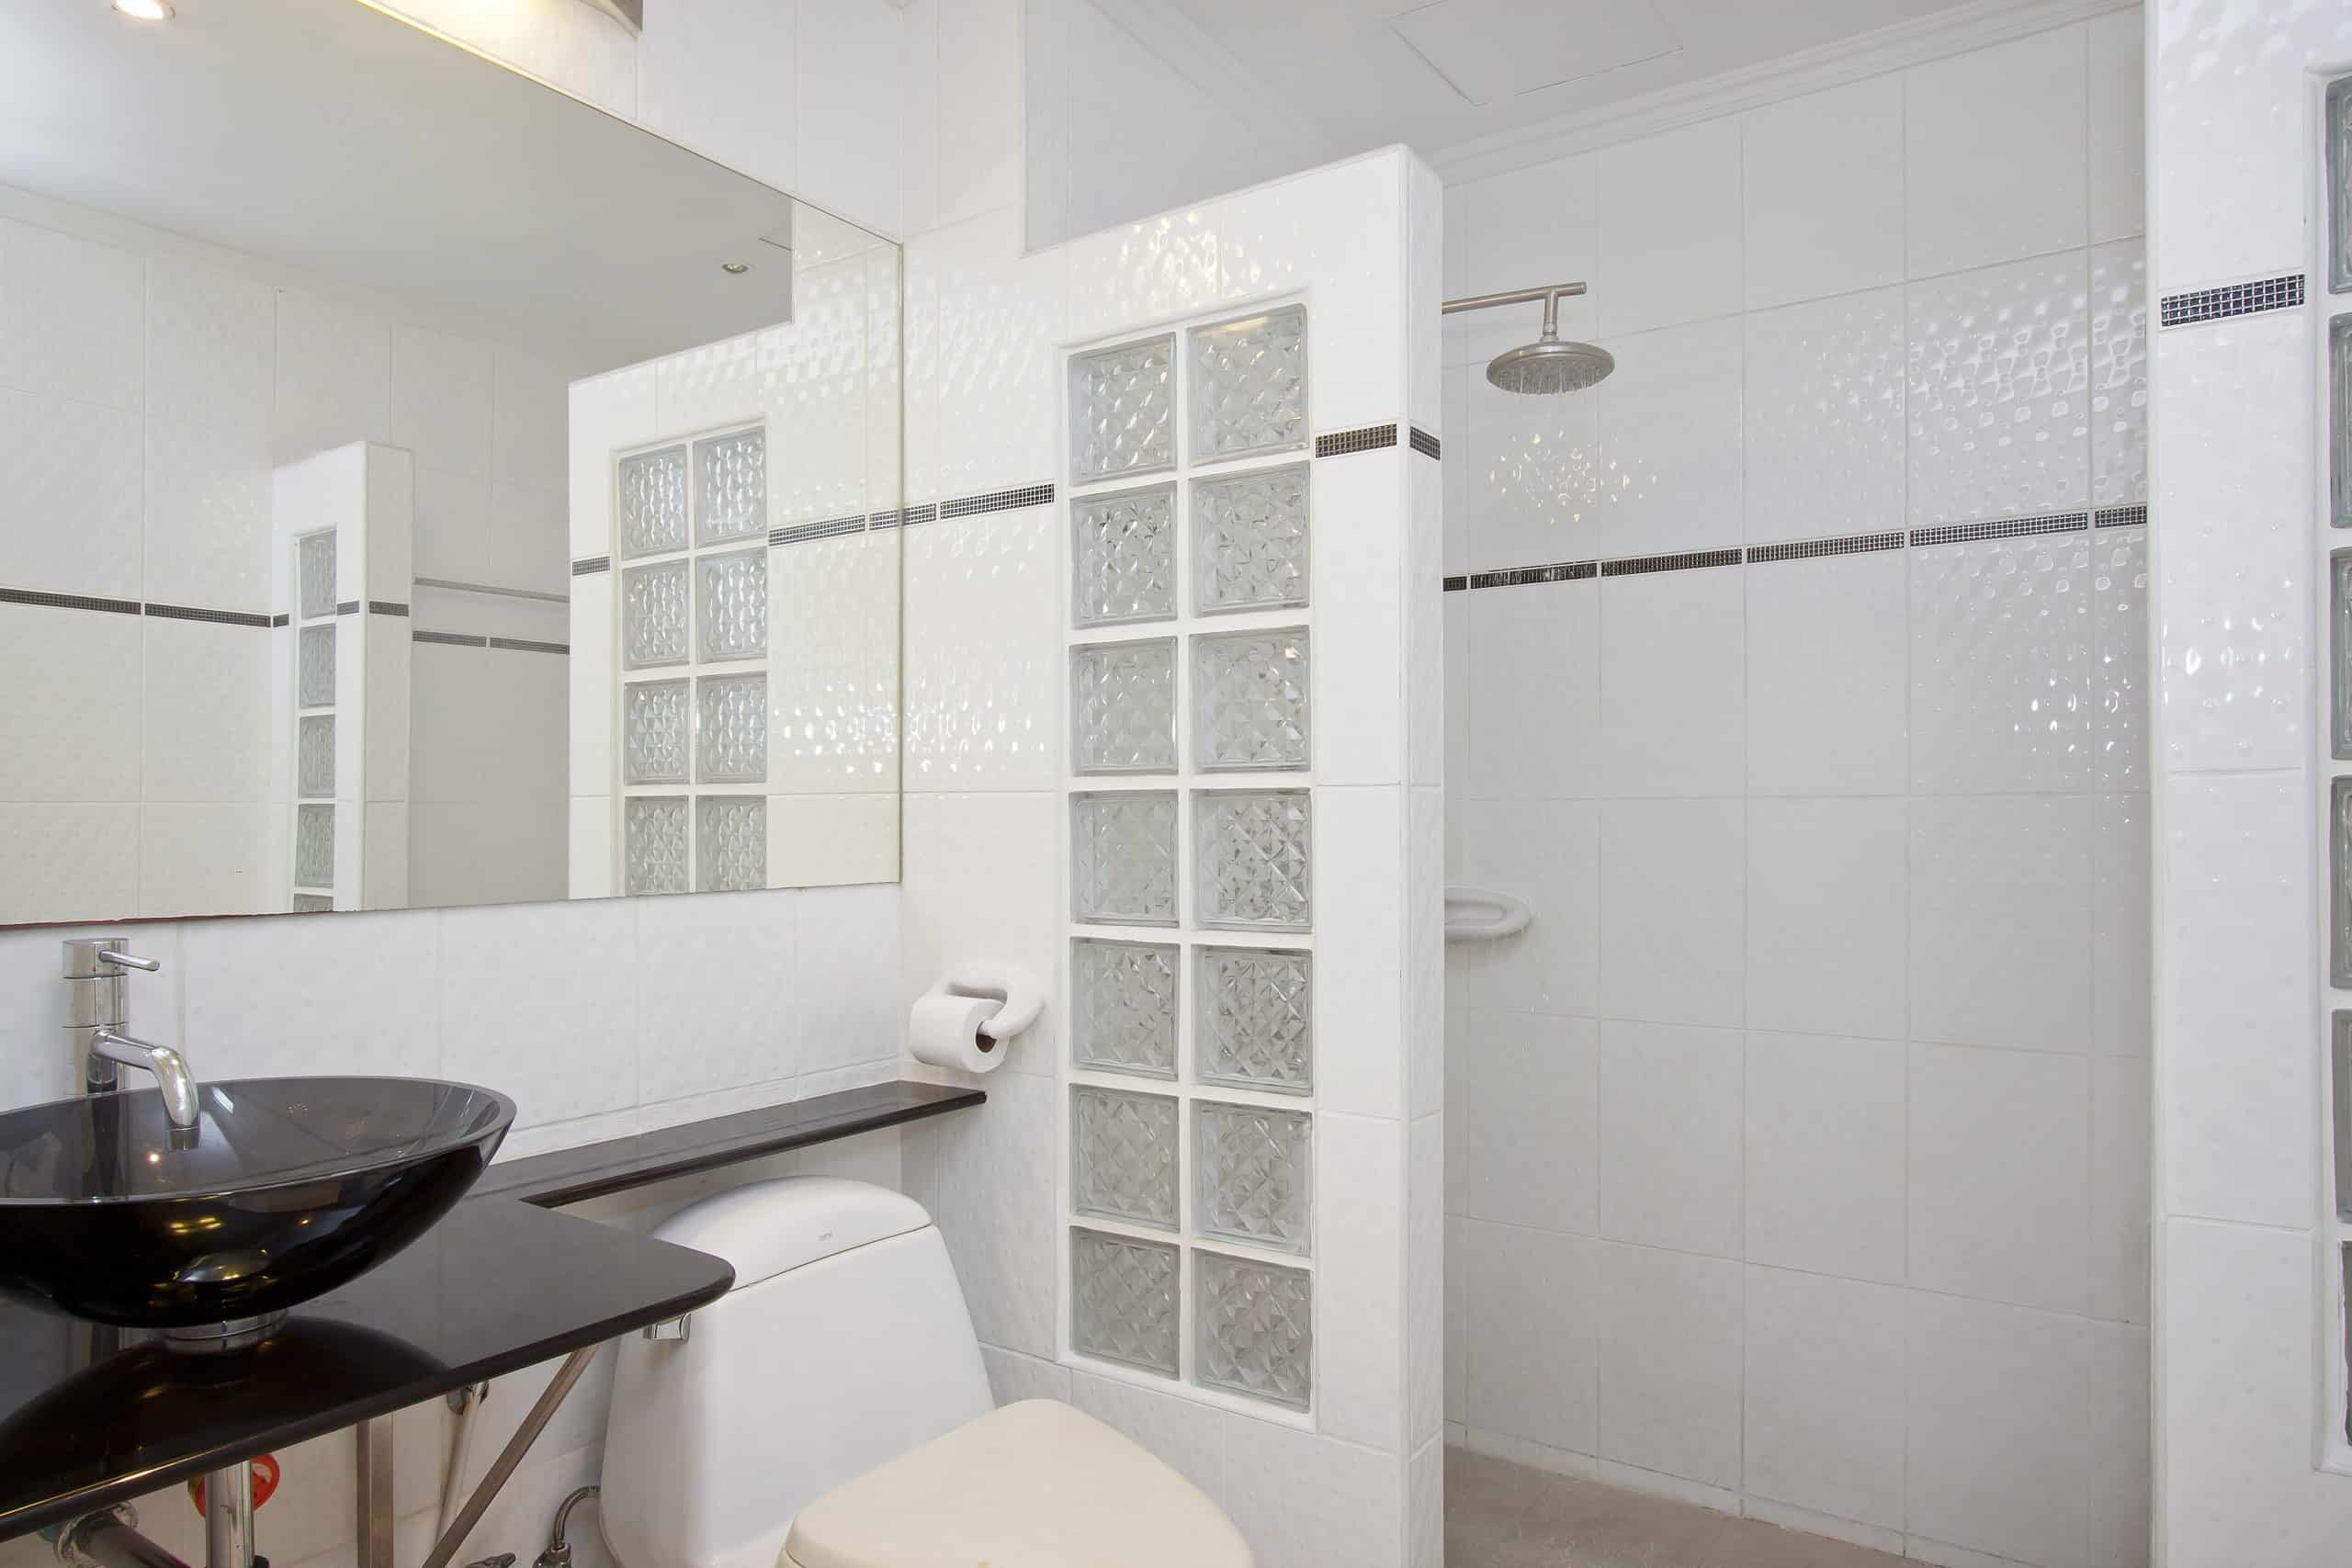 Refresh and rejuvenate with a break in the compact and private shower of our Pattaya studio apartment